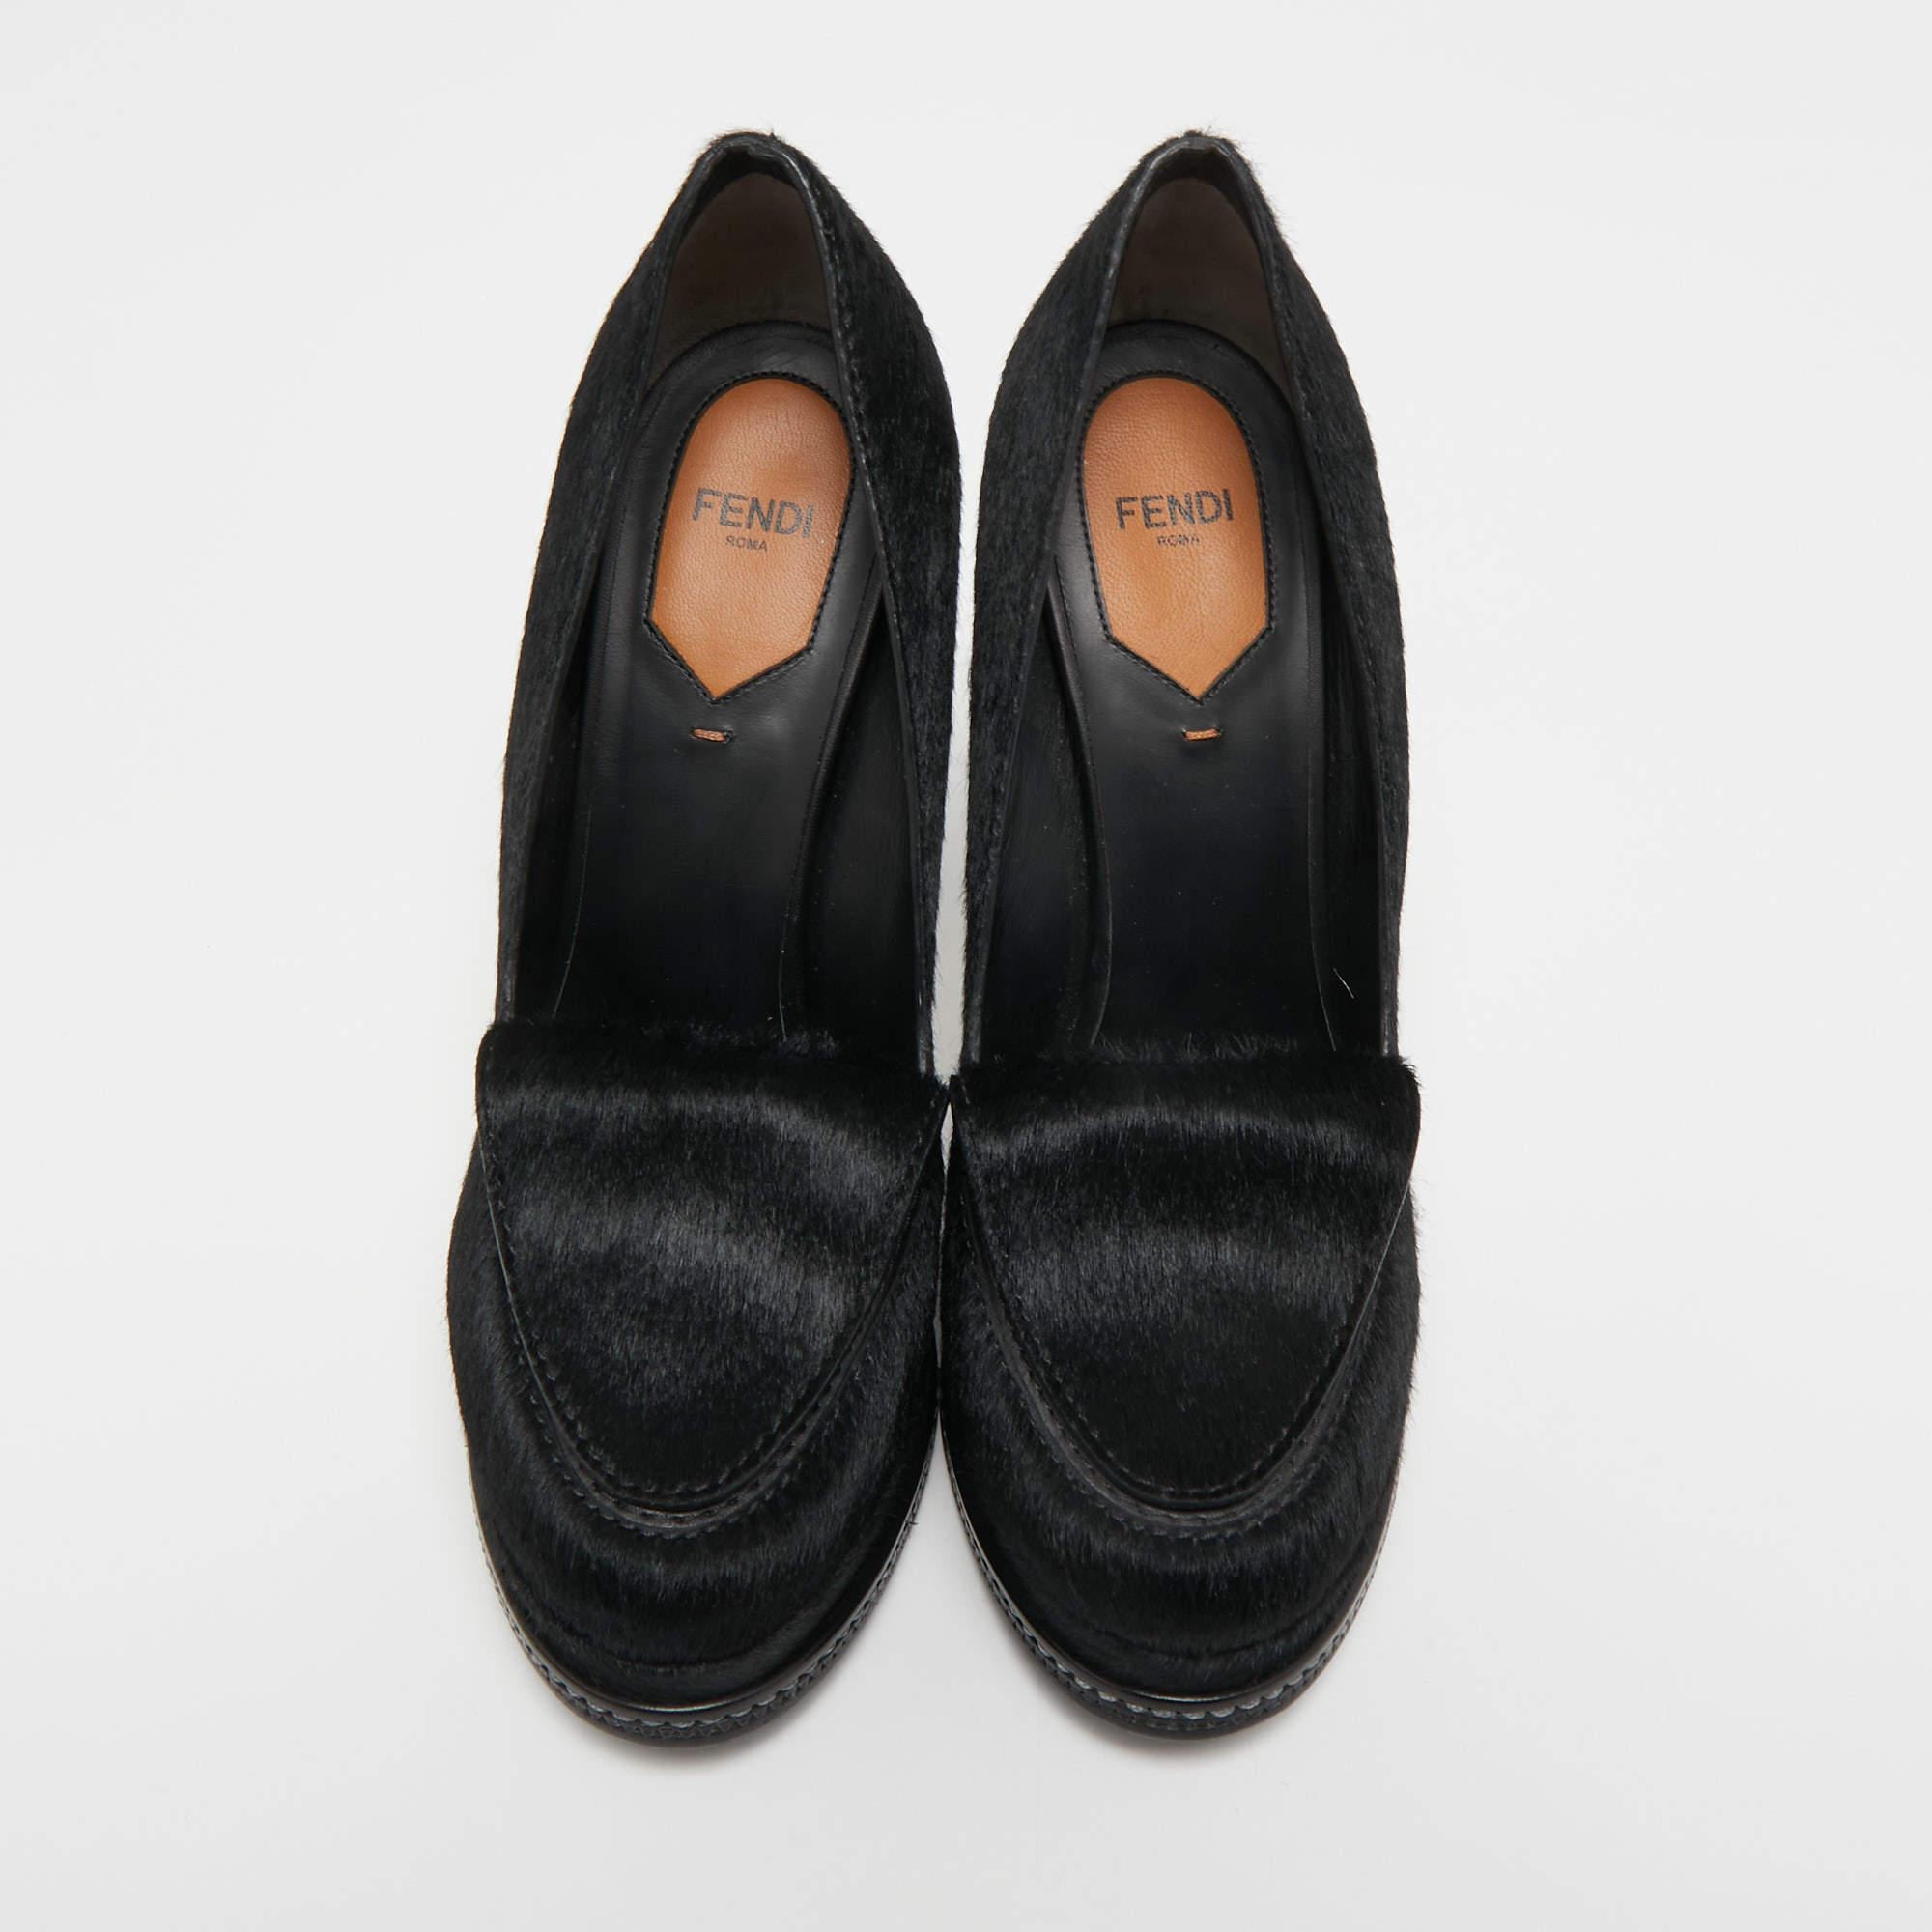 These curvaceous loafer pumps will add immense style to your look. Crafted from luxurious material, they feature well-lined insoles that offer endless comfort.

Includes: Original Dustbag, Info Booklet, Original Box

 